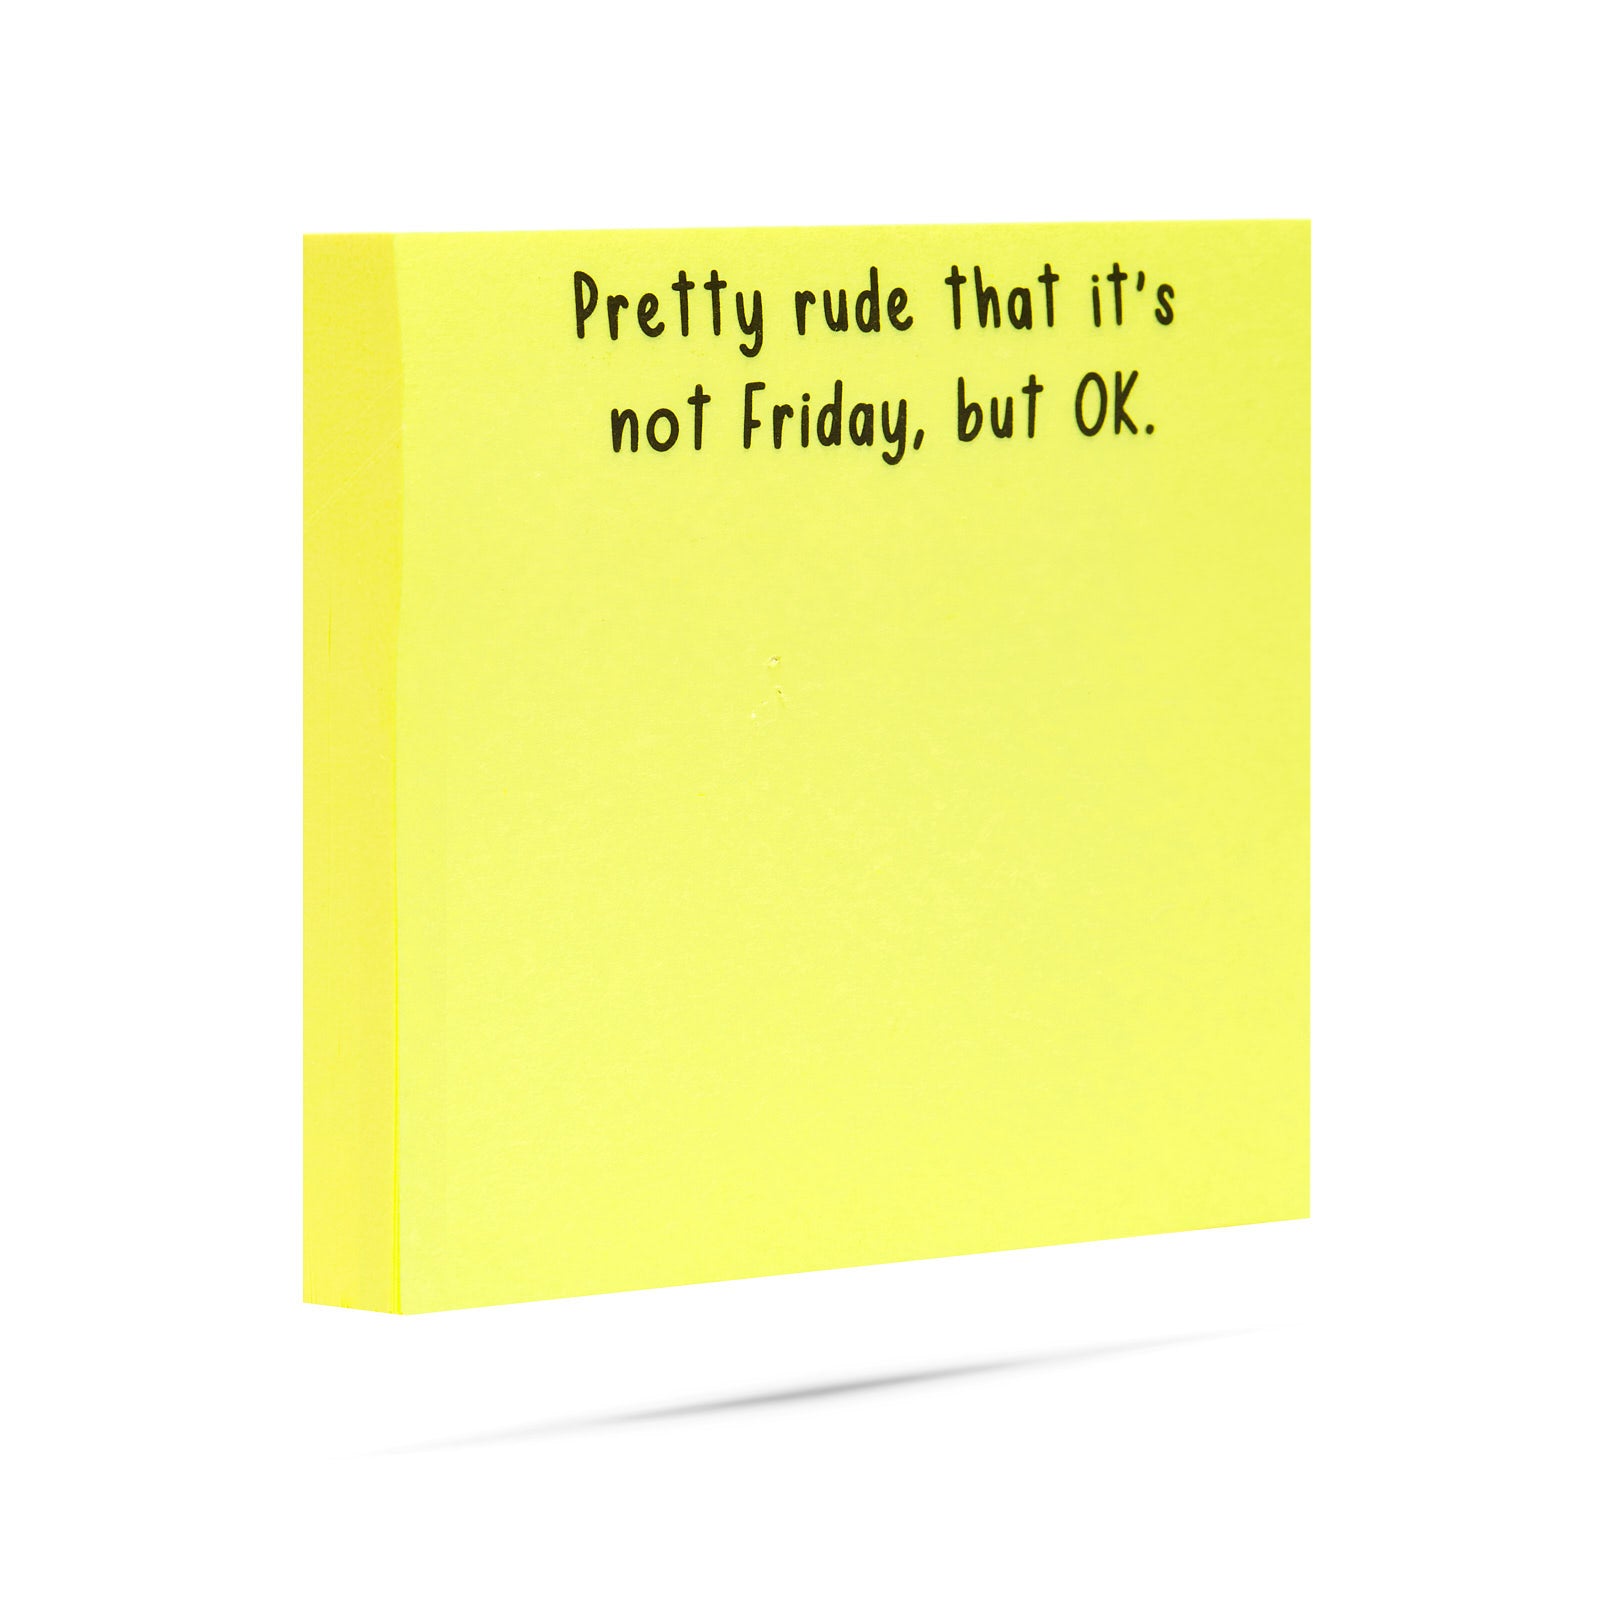 Pretty rude that it's not Friday, but OK 100 sheet sticky note pad